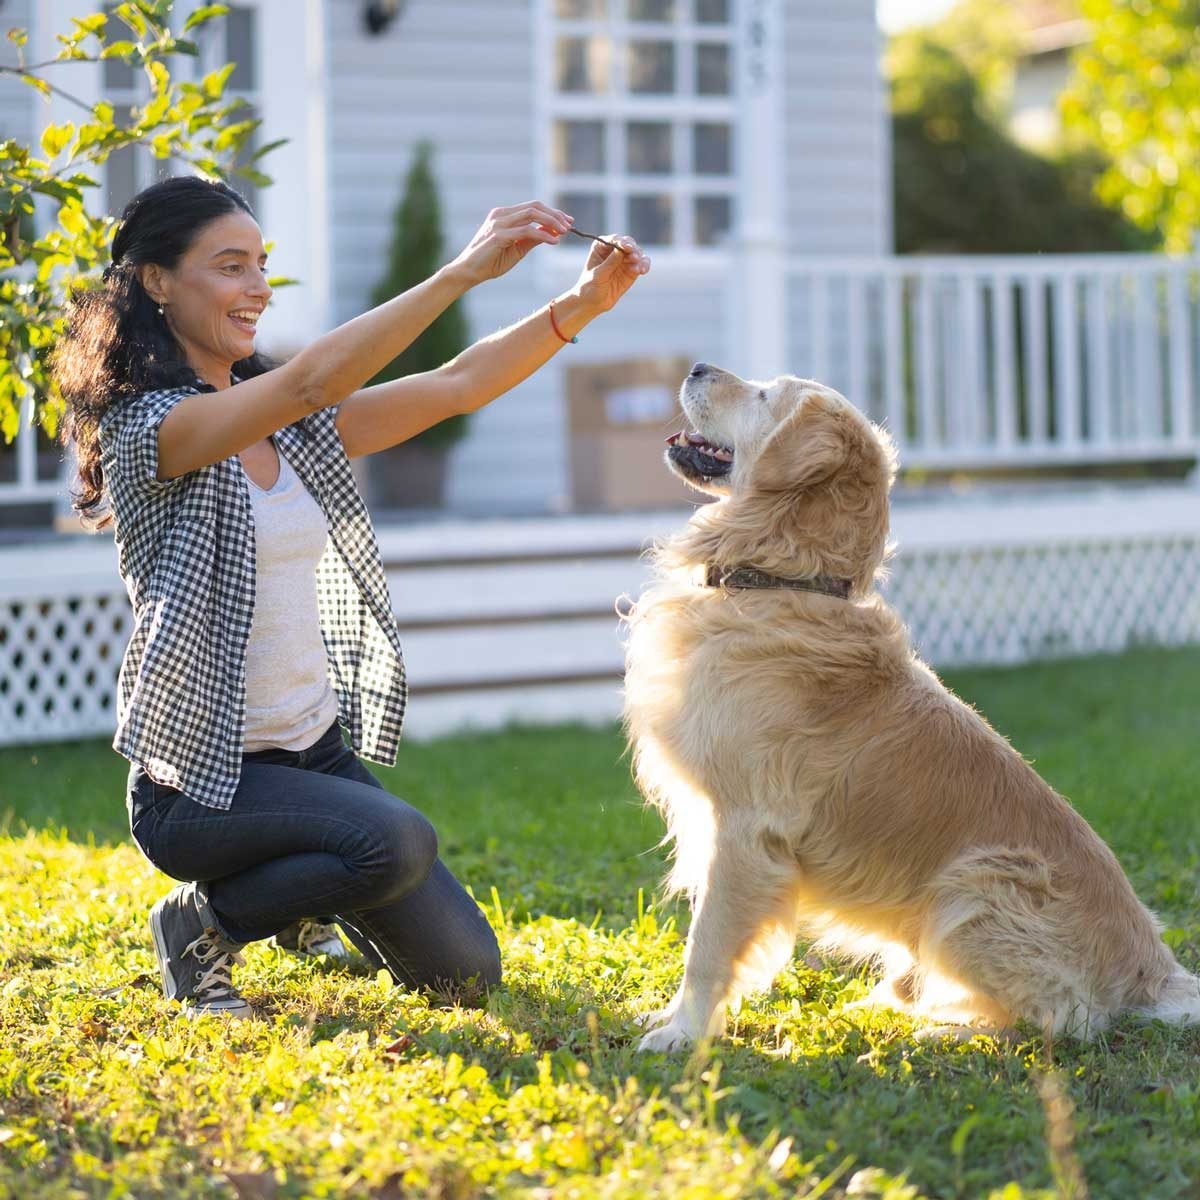 Do You Have the Best Dog Training Tools You Need to Succeed?